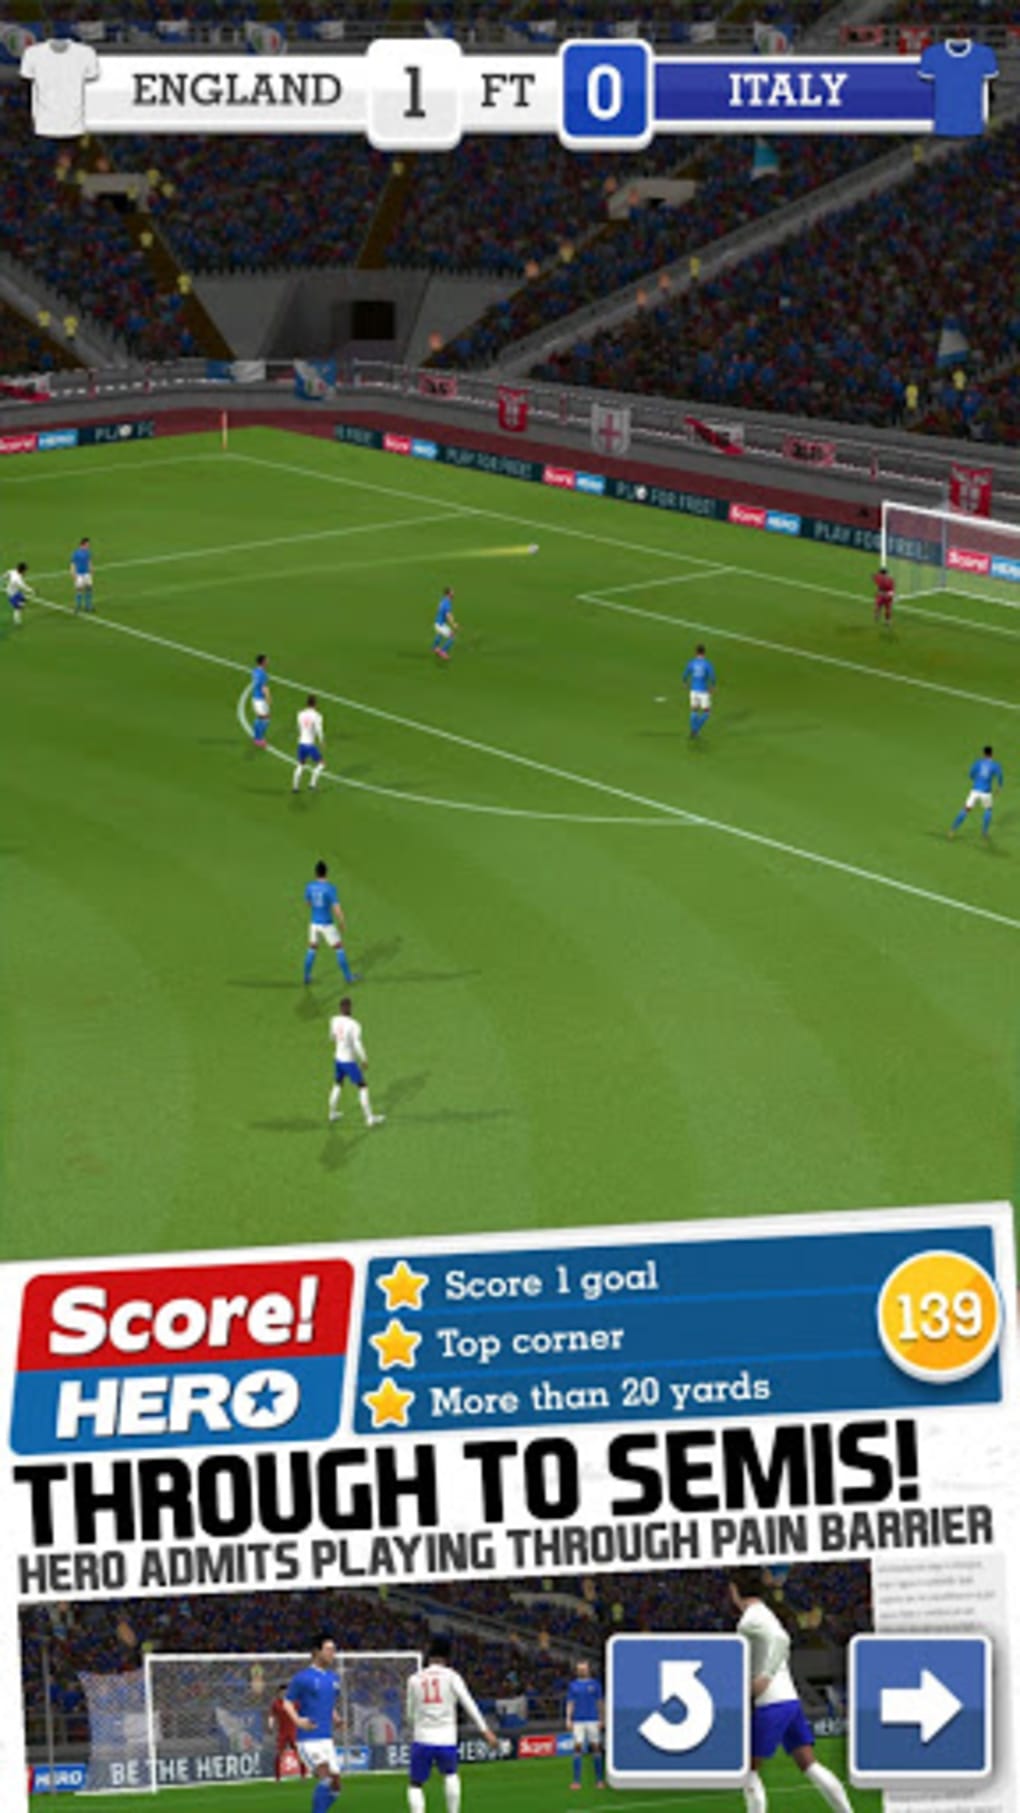 Score! Hero 2023 APK Download for Android Free